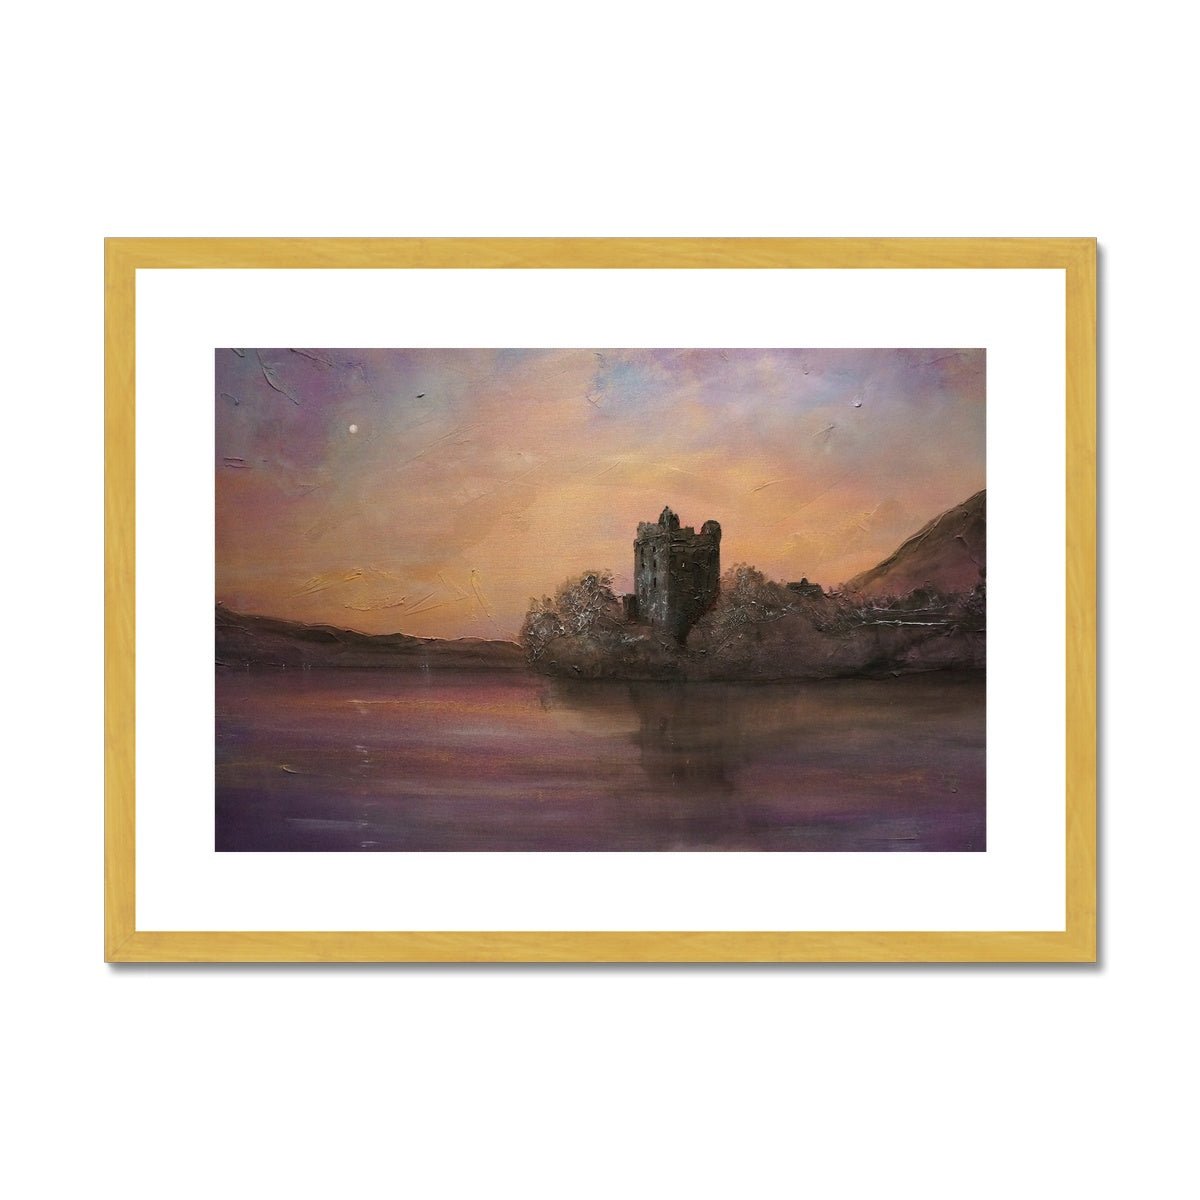 Urquhart Castle Moonlight Painting | Antique Framed & Mounted Prints From Scotland-Antique Framed & Mounted Prints-Historic & Iconic Scotland Art Gallery-A2 Landscape-Gold Frame-Paintings, Prints, Homeware, Art Gifts From Scotland By Scottish Artist Kevin Hunter